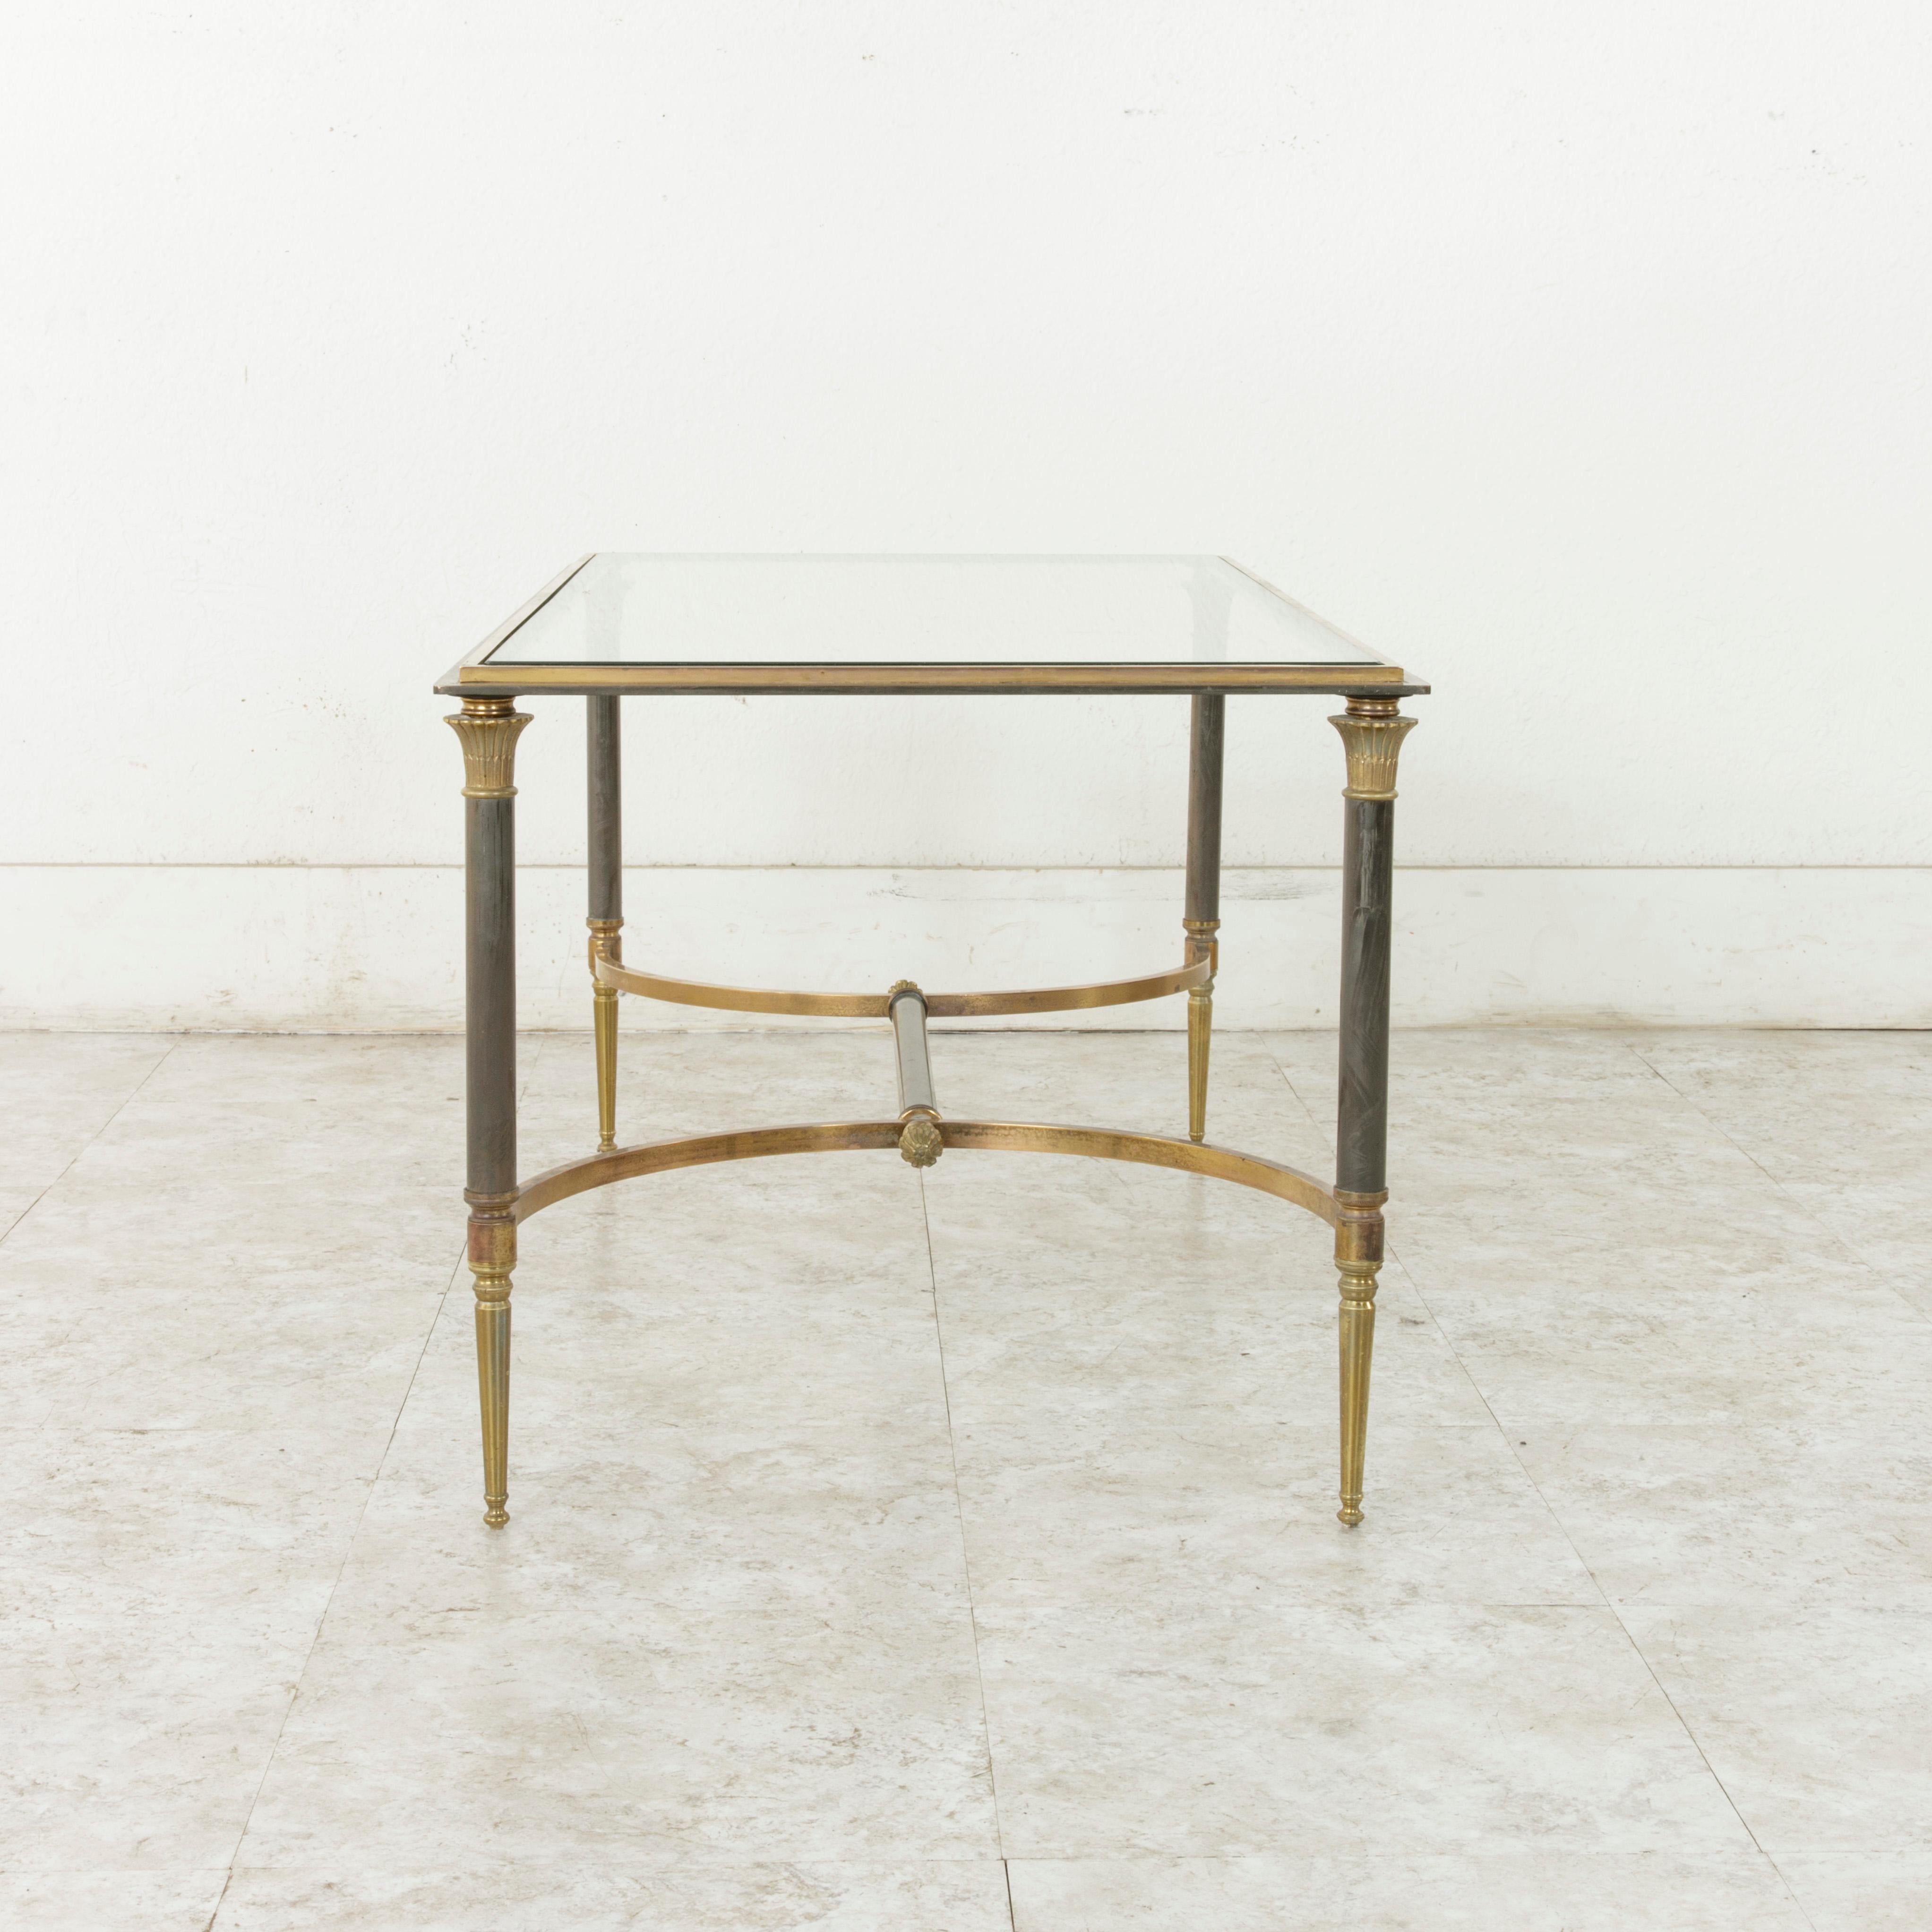 Mid-20th Century French Maison Jansen Brass and Iron Coffee Table with Glass Top 1